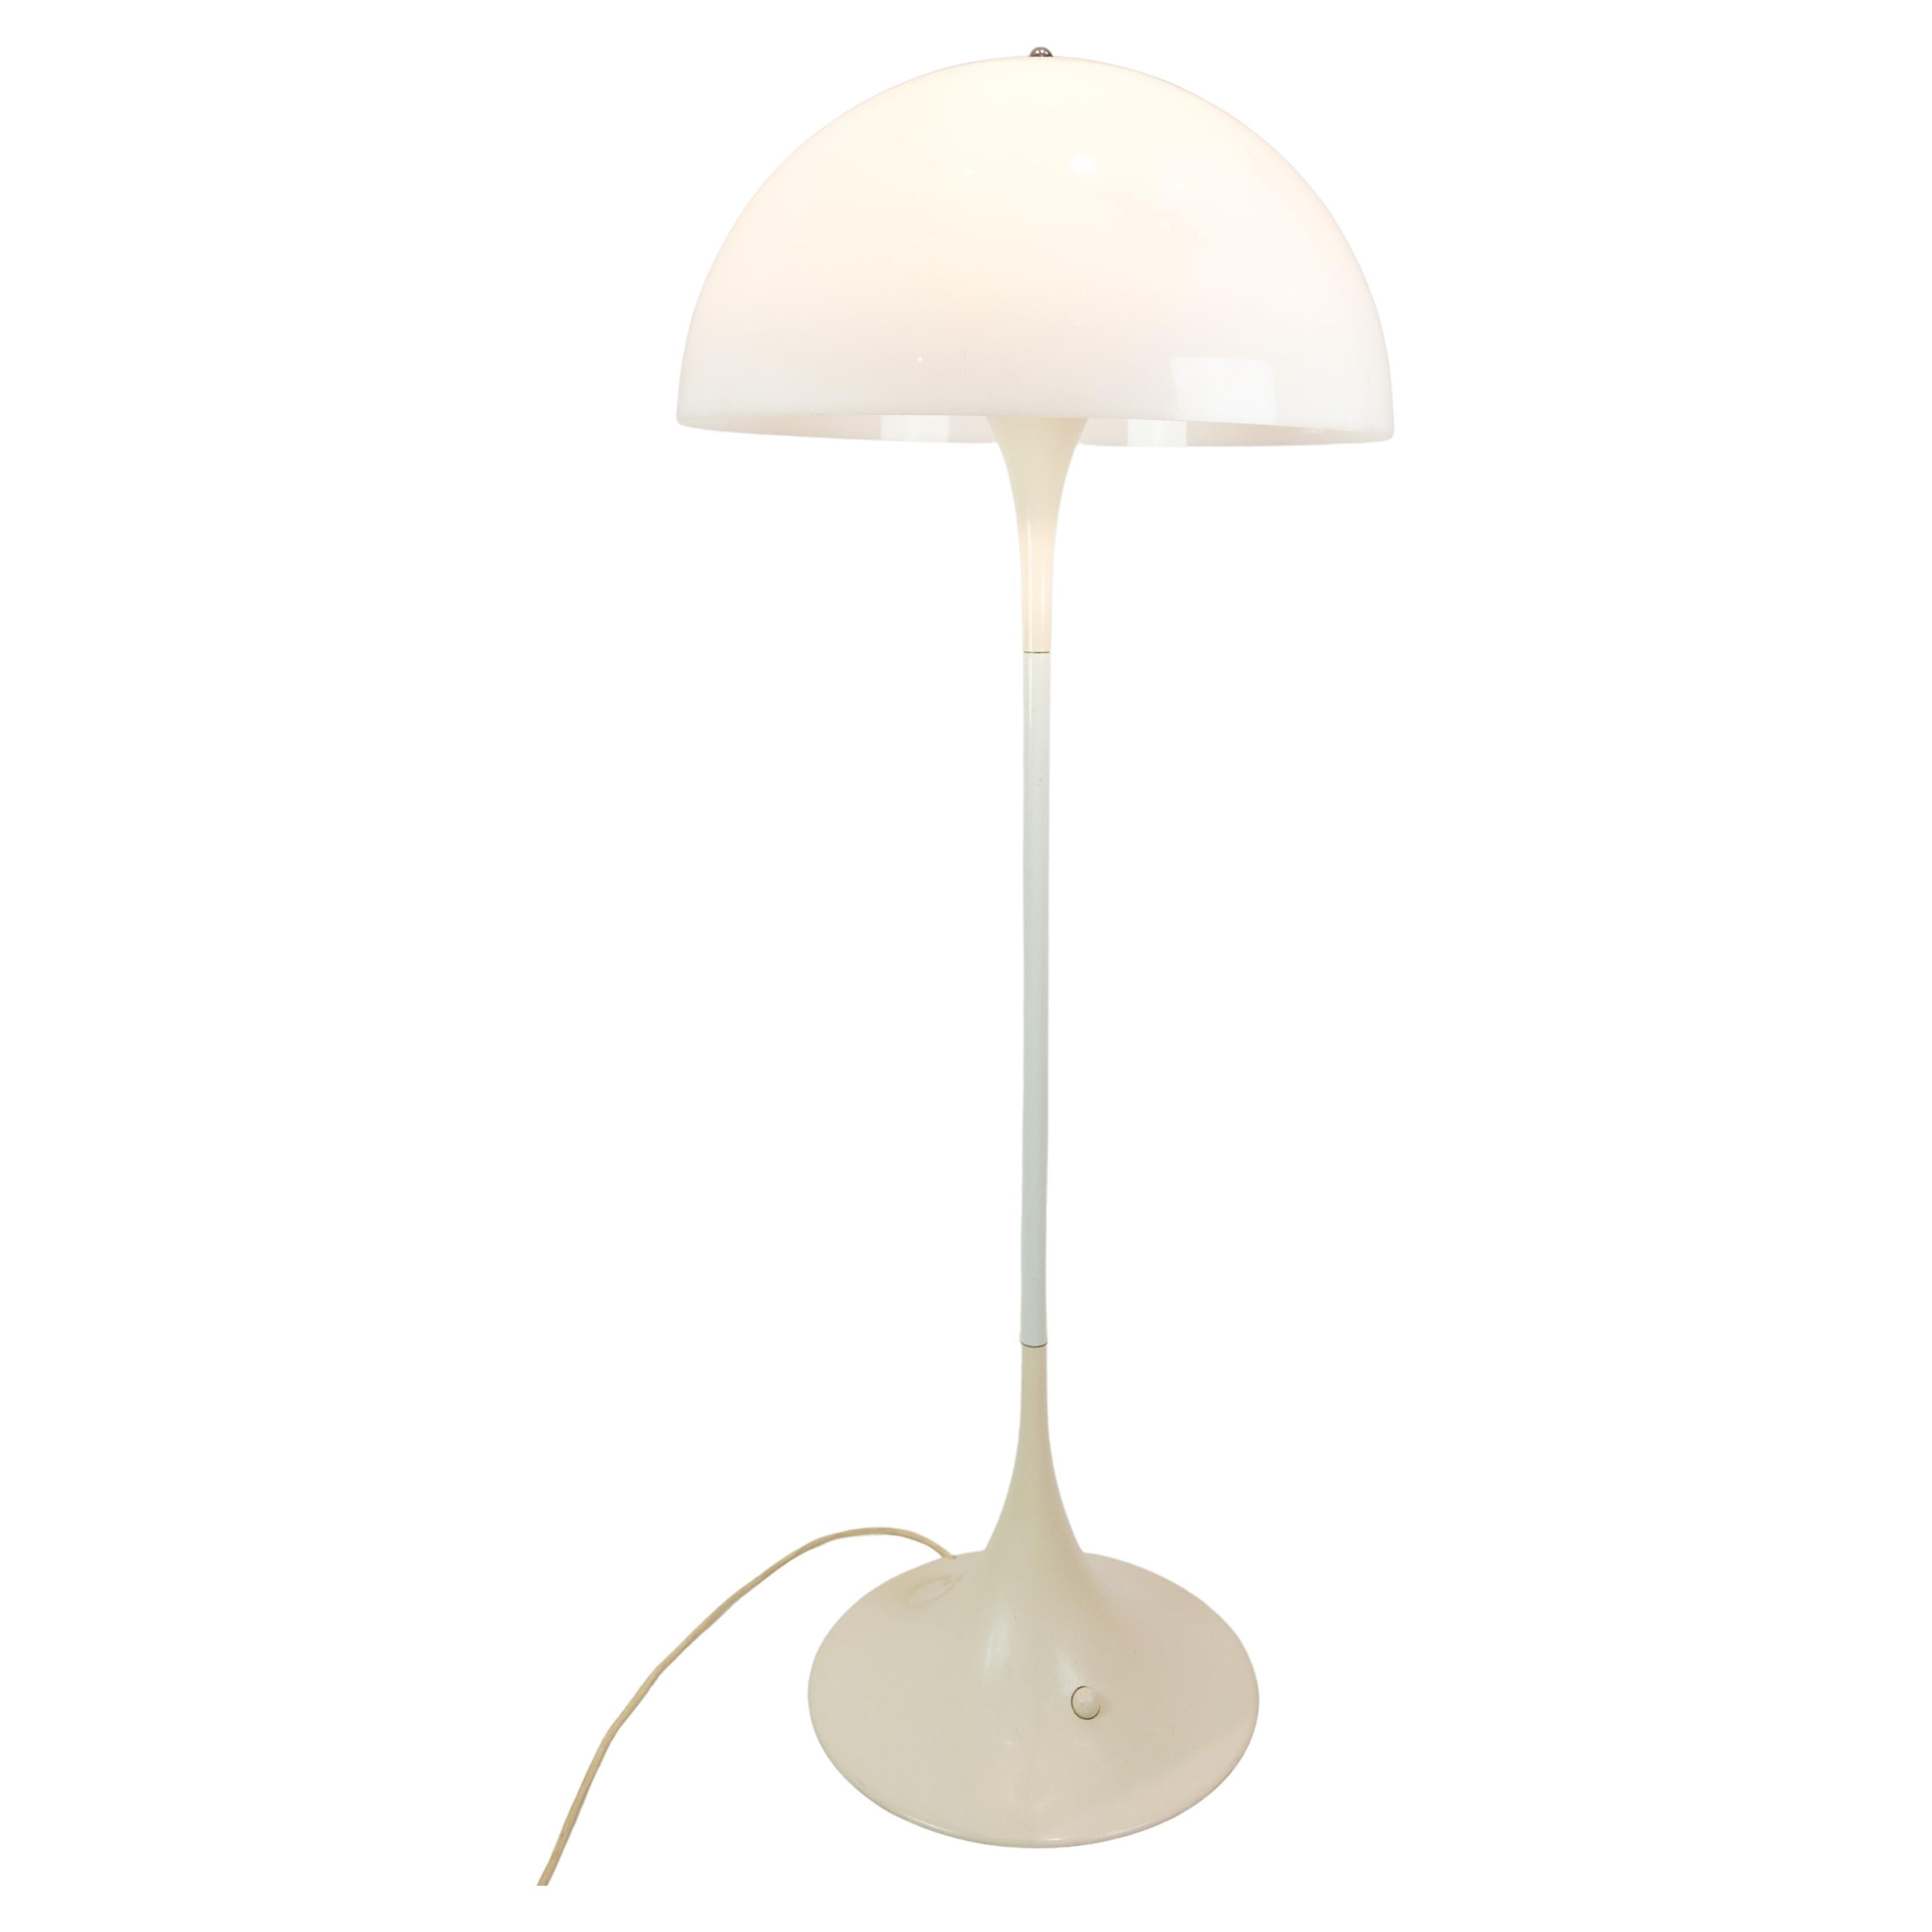 Floor Lamp Model Panthella By Verner Panton For Louis Poulsen From 1980s